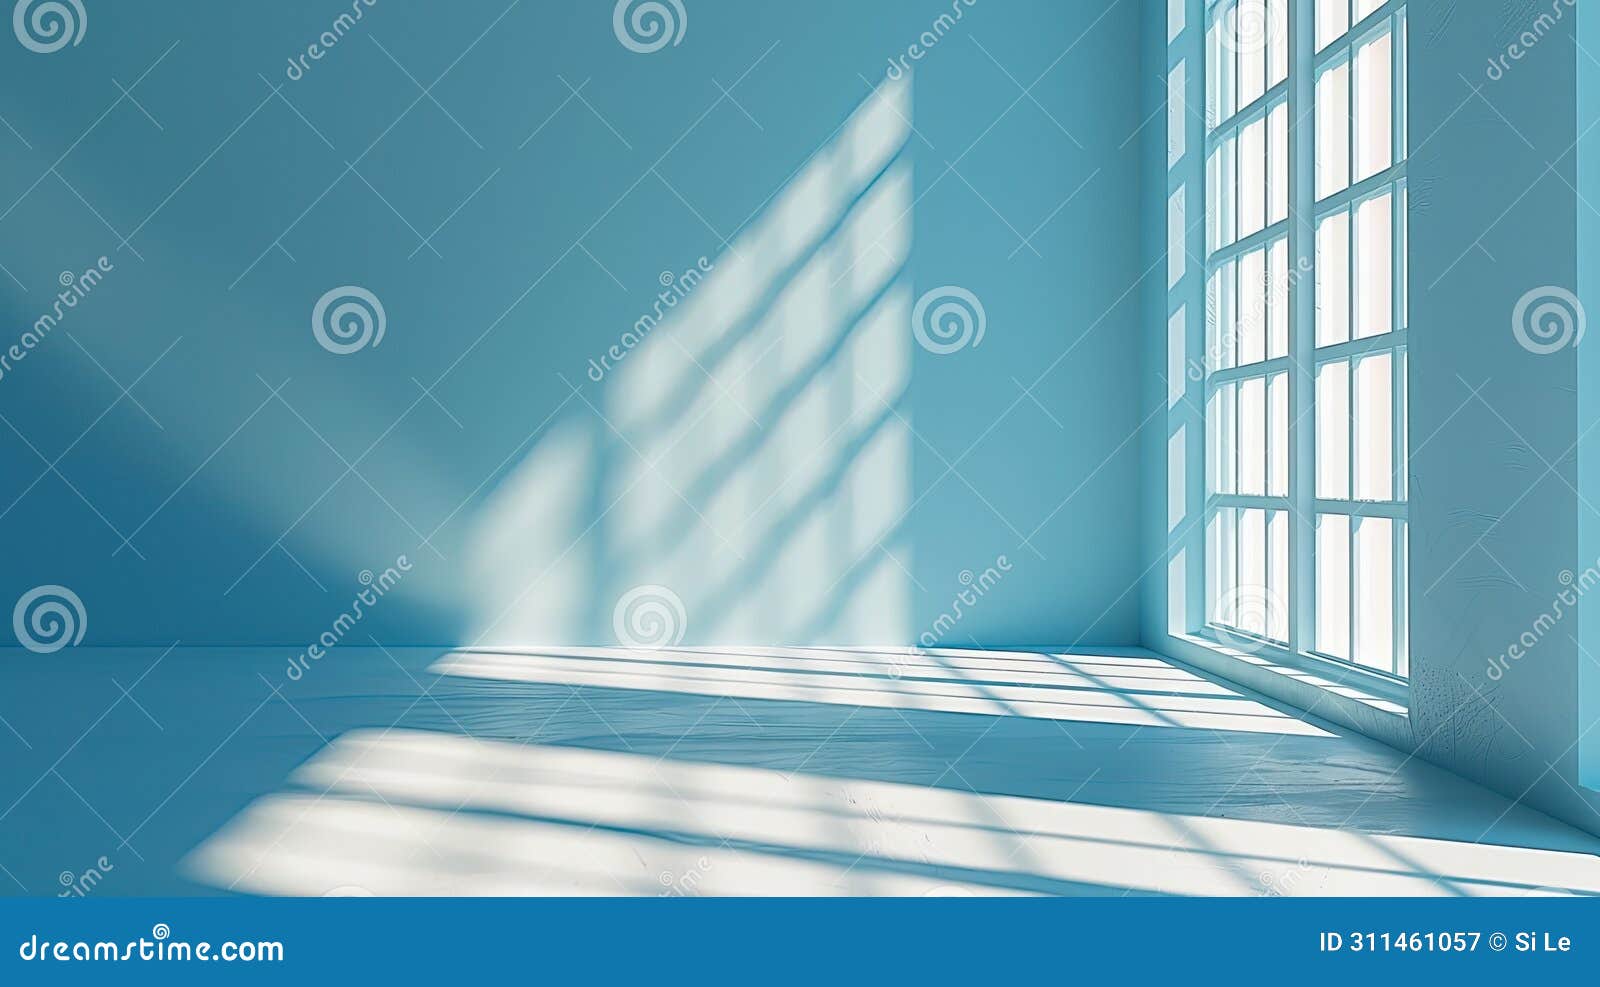 windowed minimalism: abstract light blue backdrop for product presentations